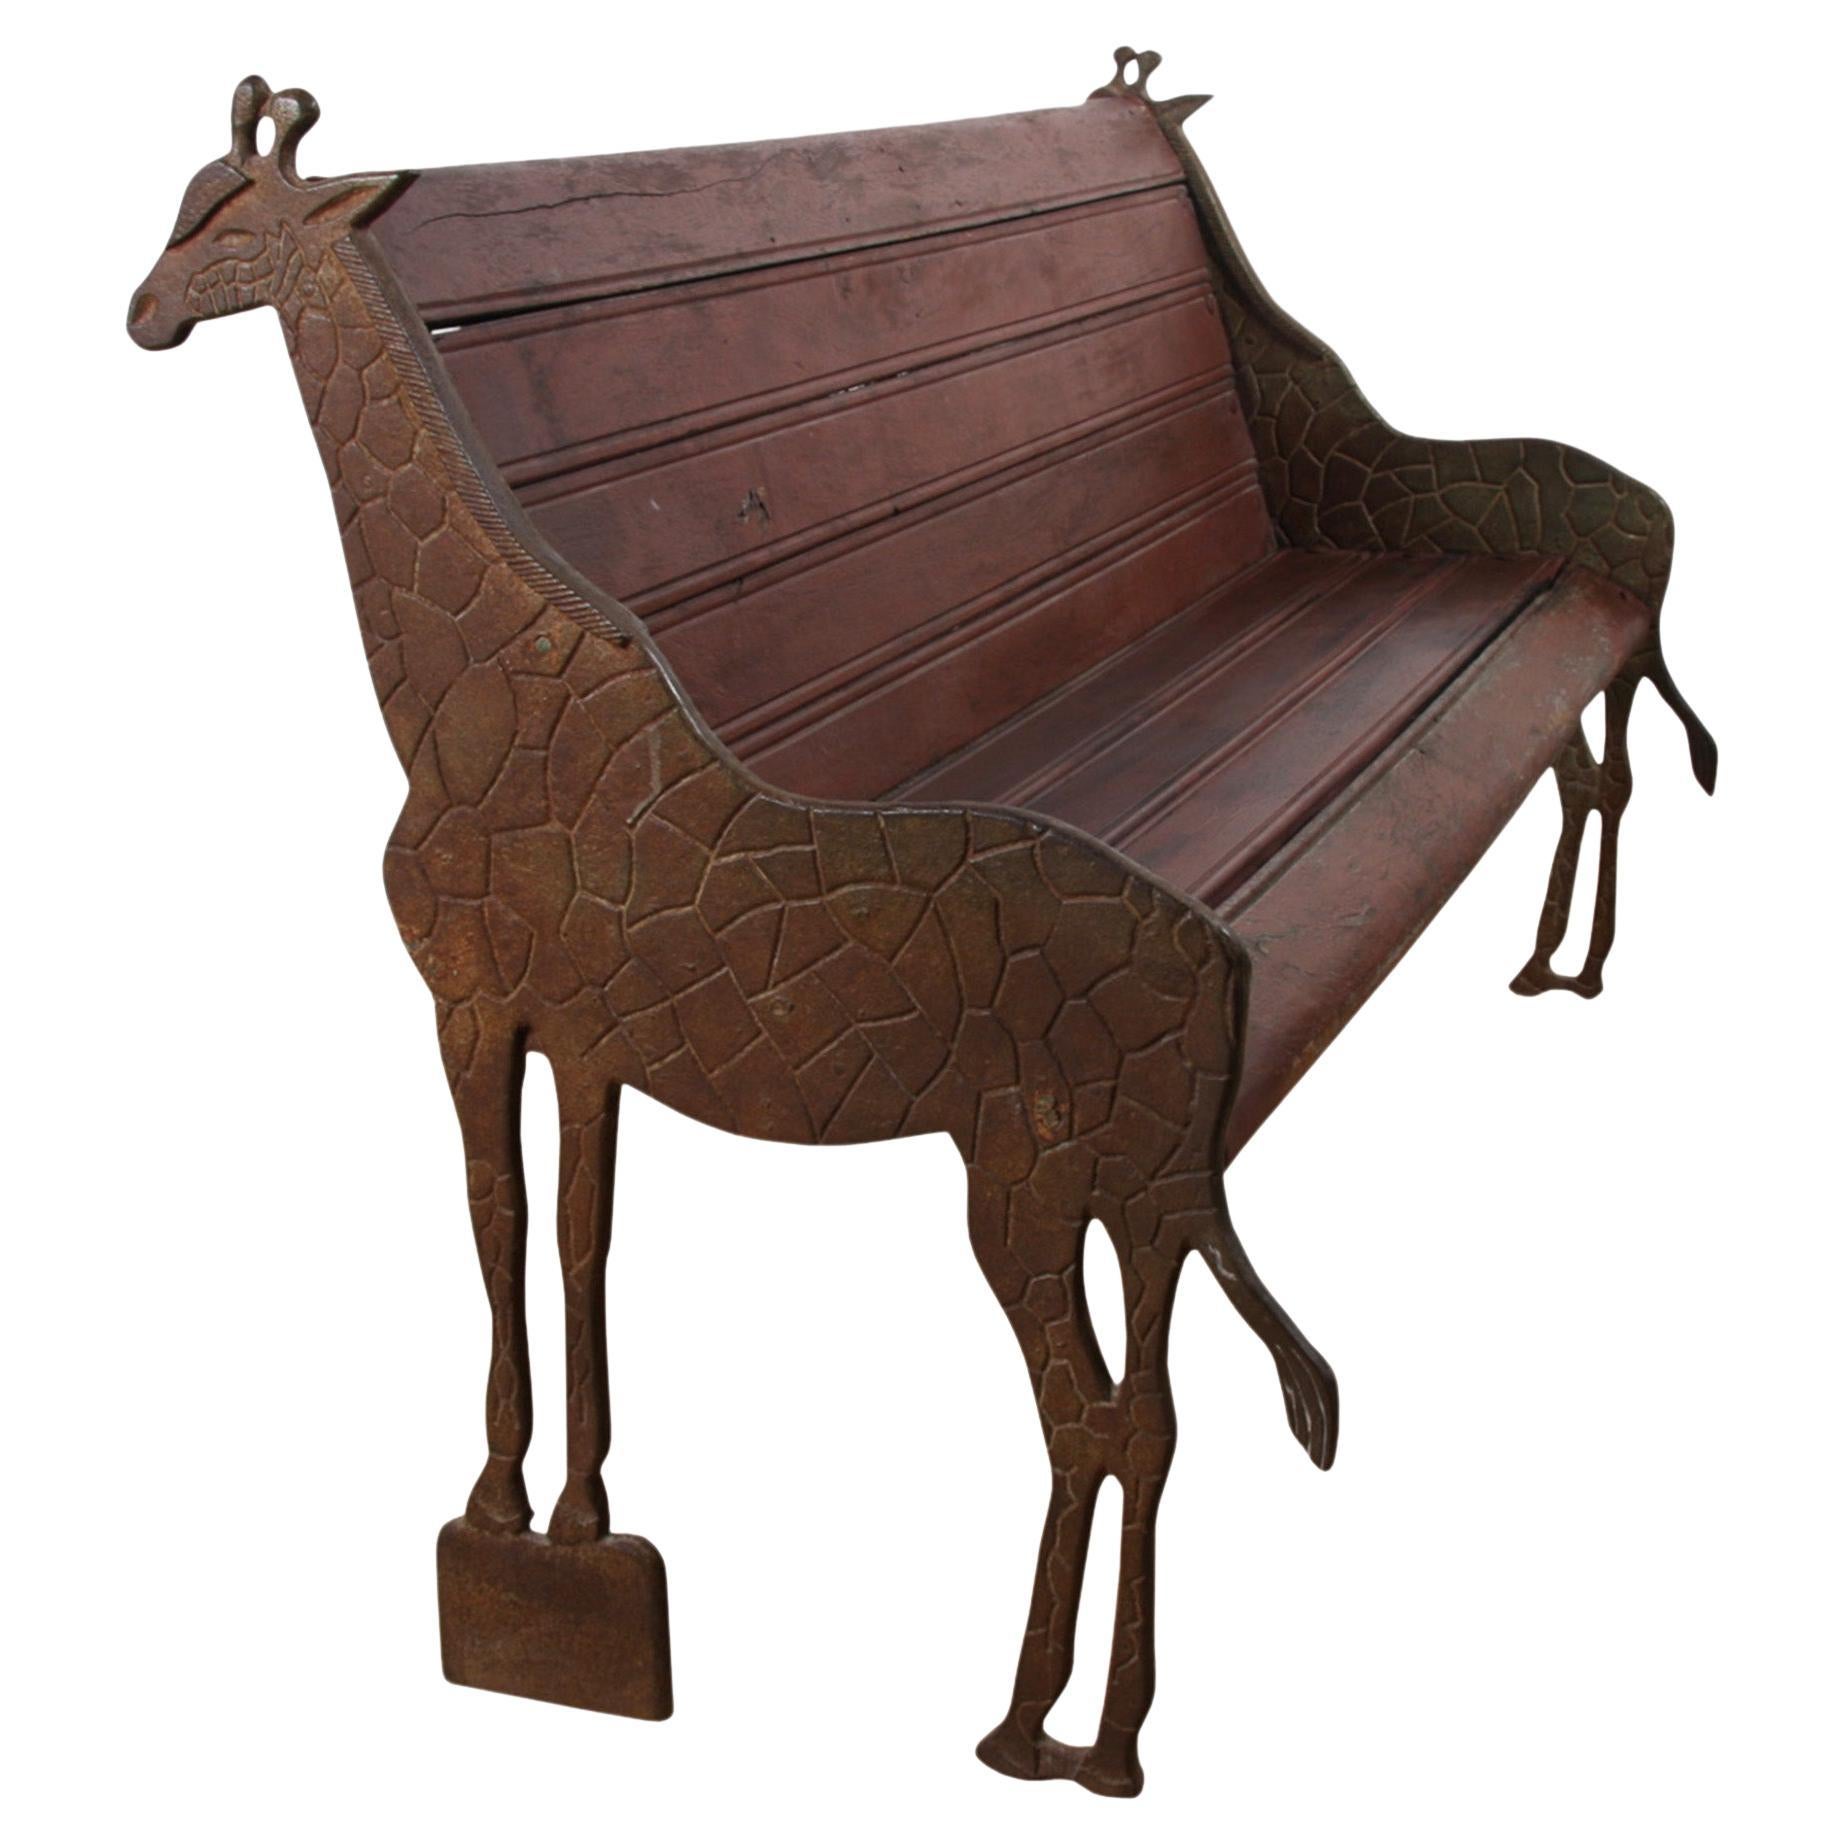 Giraffe Bench, Made for Colchester Zoo, England 1950s For Sale